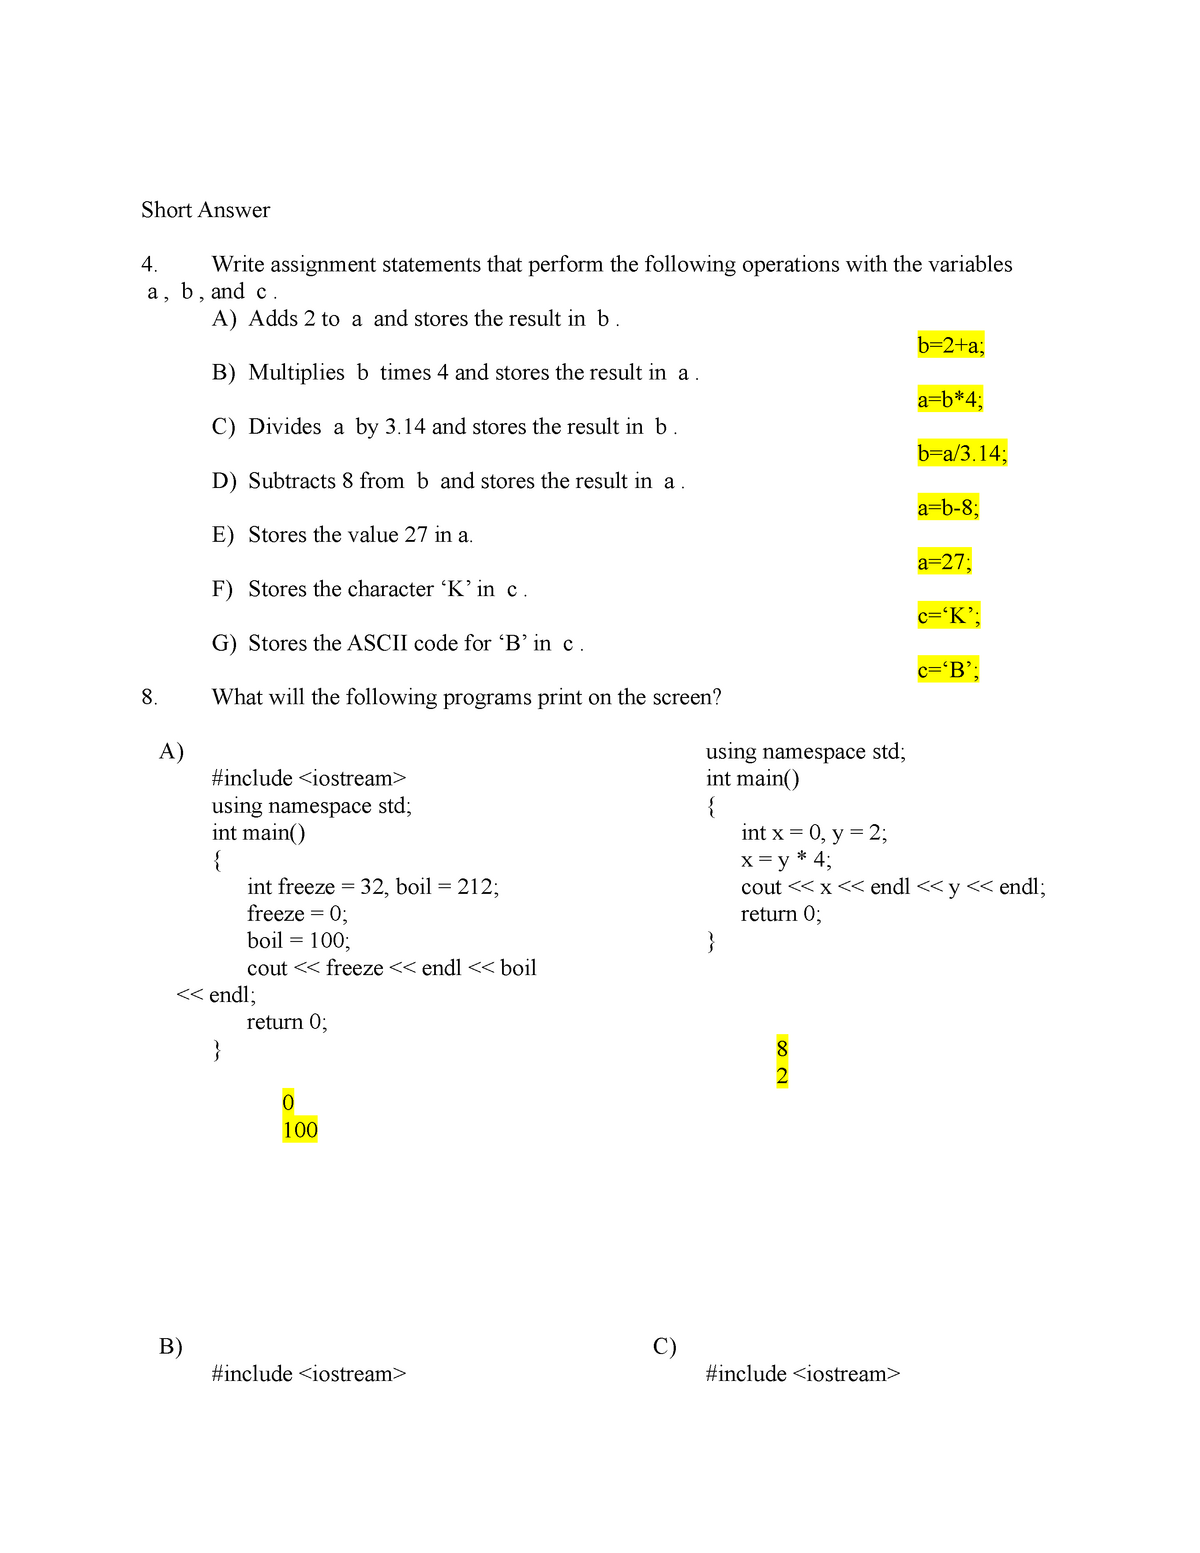 write assignment statements that perform the following operations